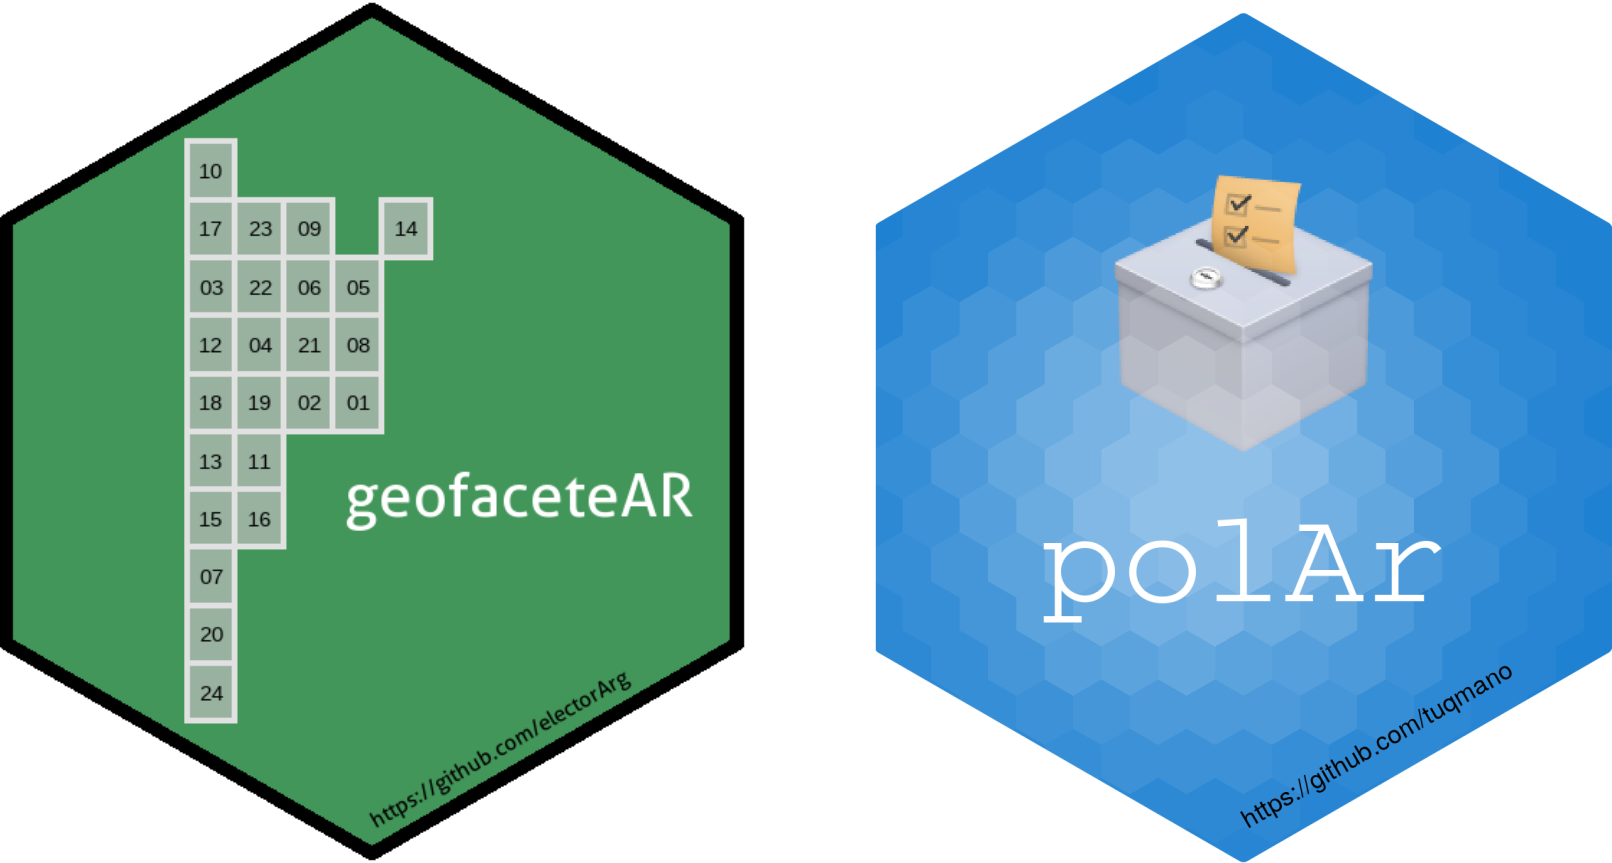 geofecetAR R package hex logo on the left and original polAr R package hex logo on the right